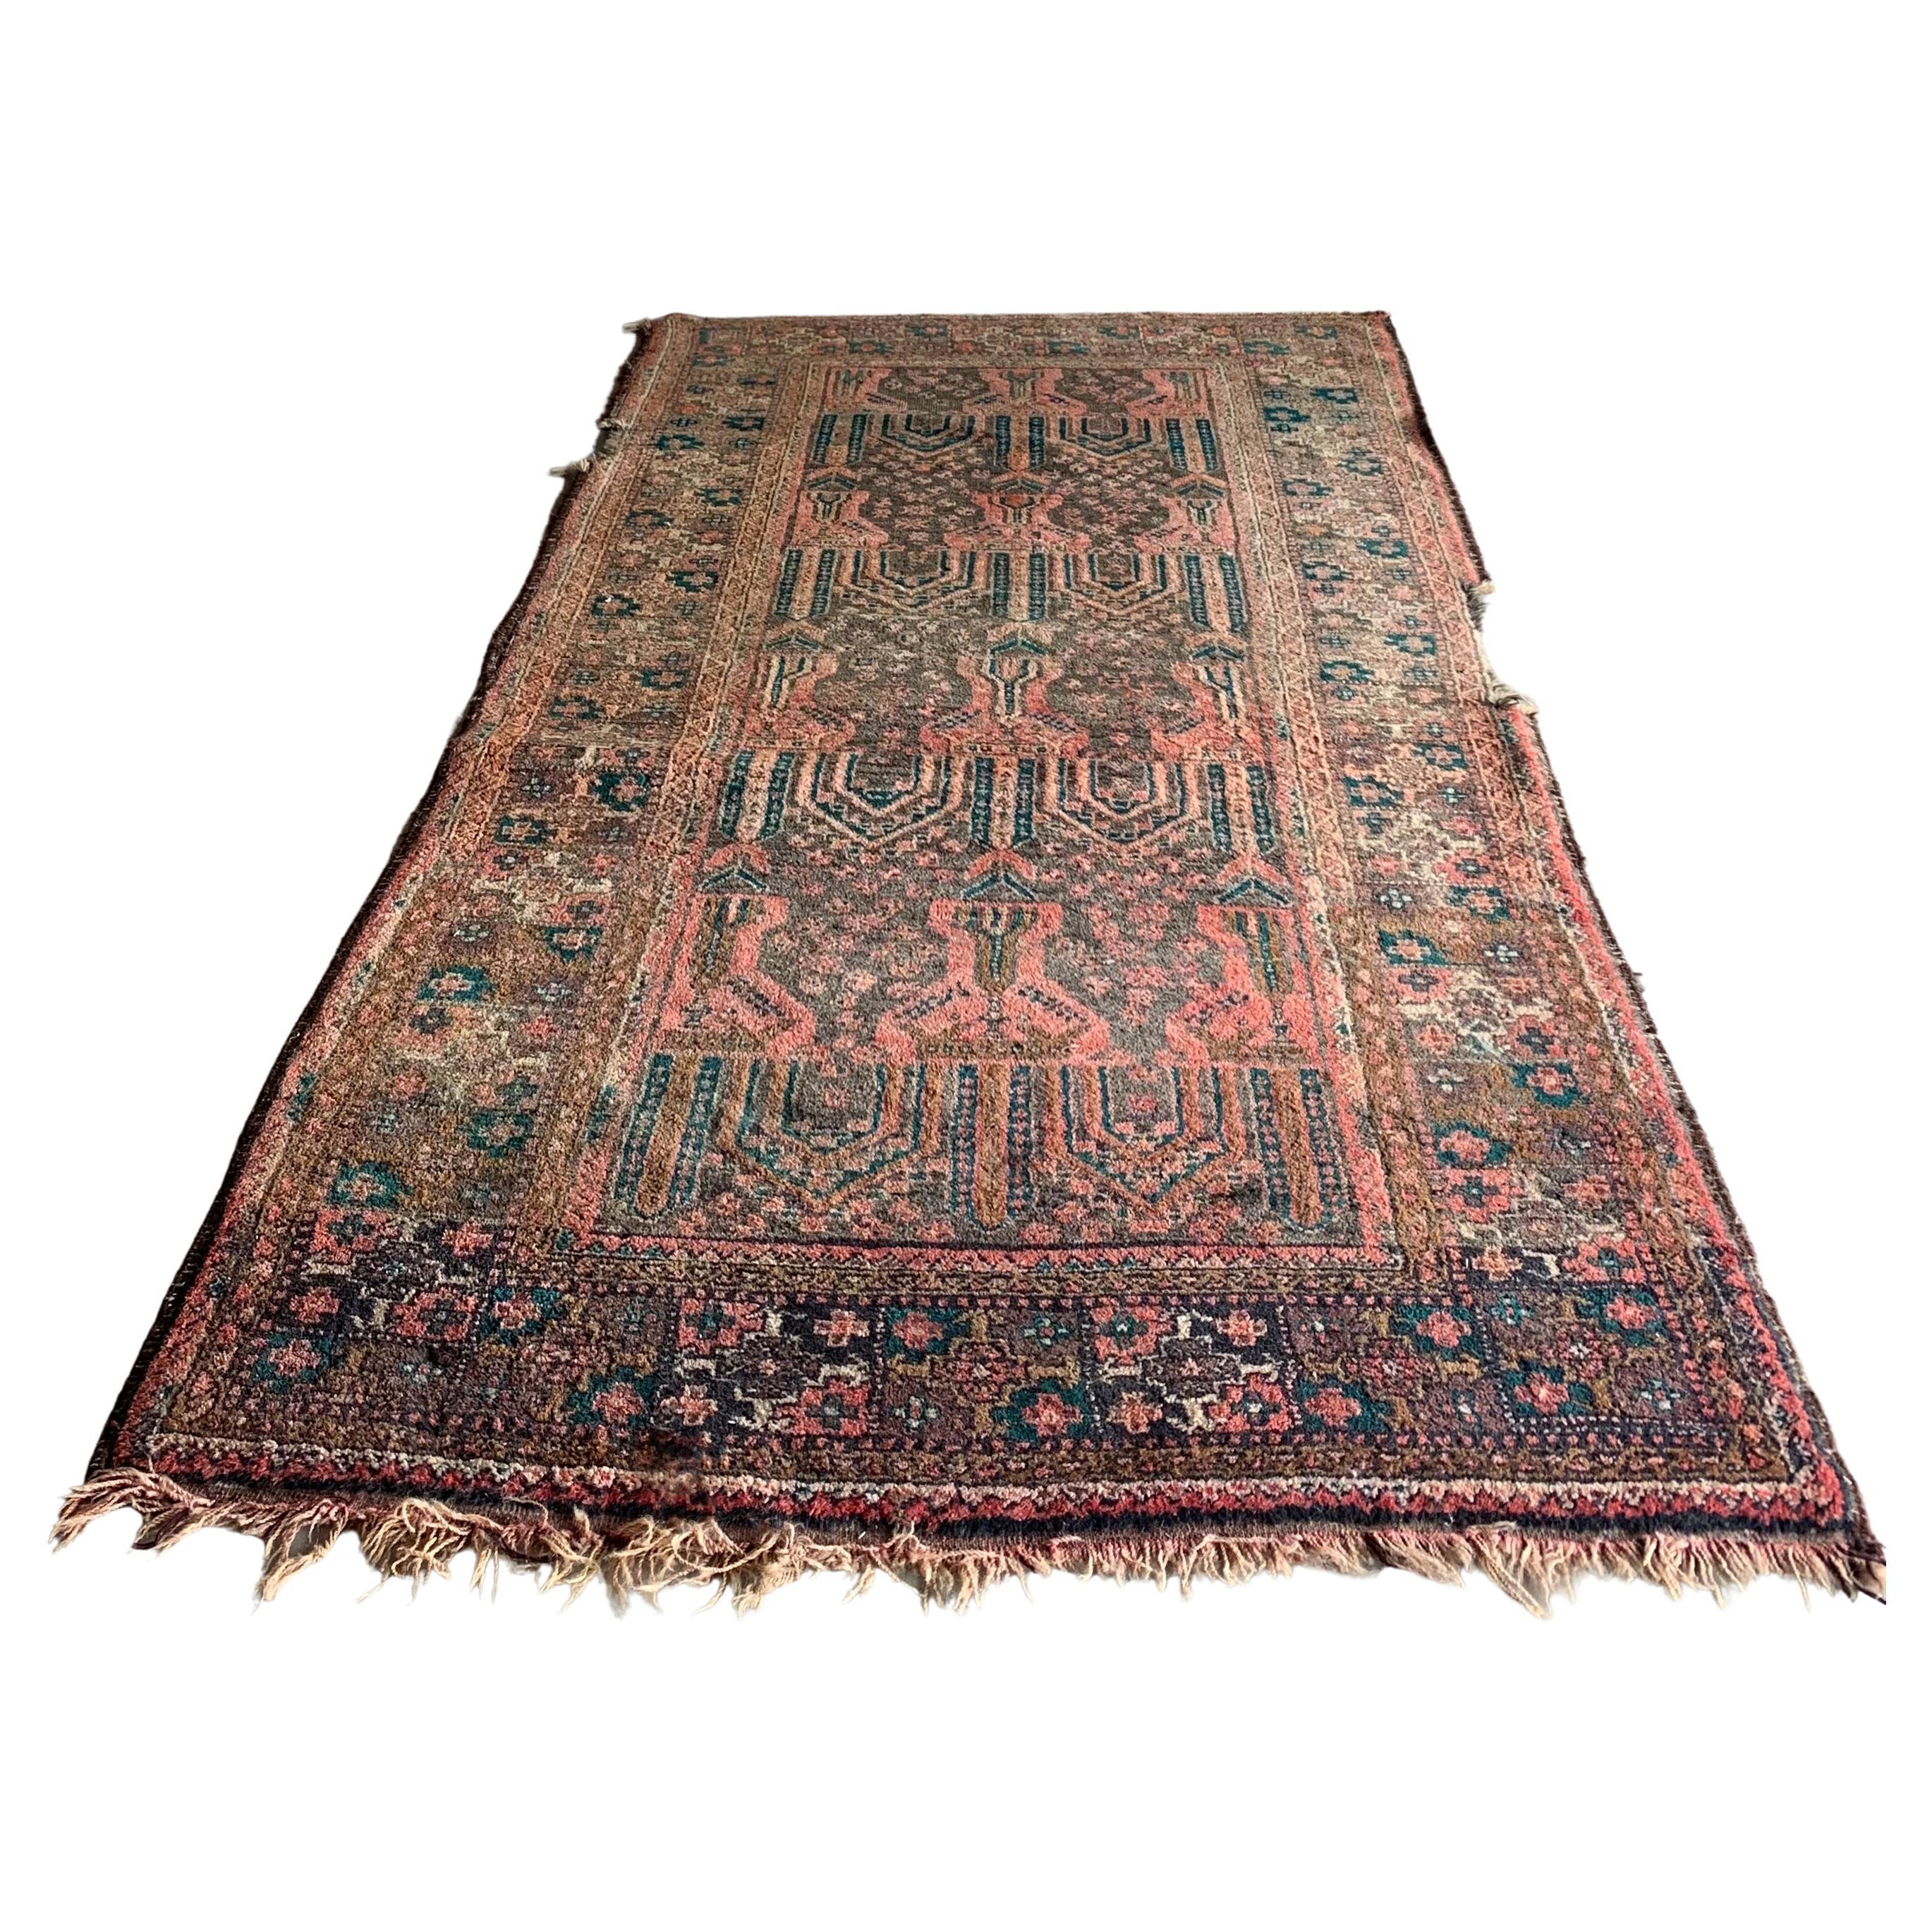 Over 100 yr old antique rug. 7ft long by 3ft & 1/2 wide. Distressed in some area, still holds its beautiful patterning & color.